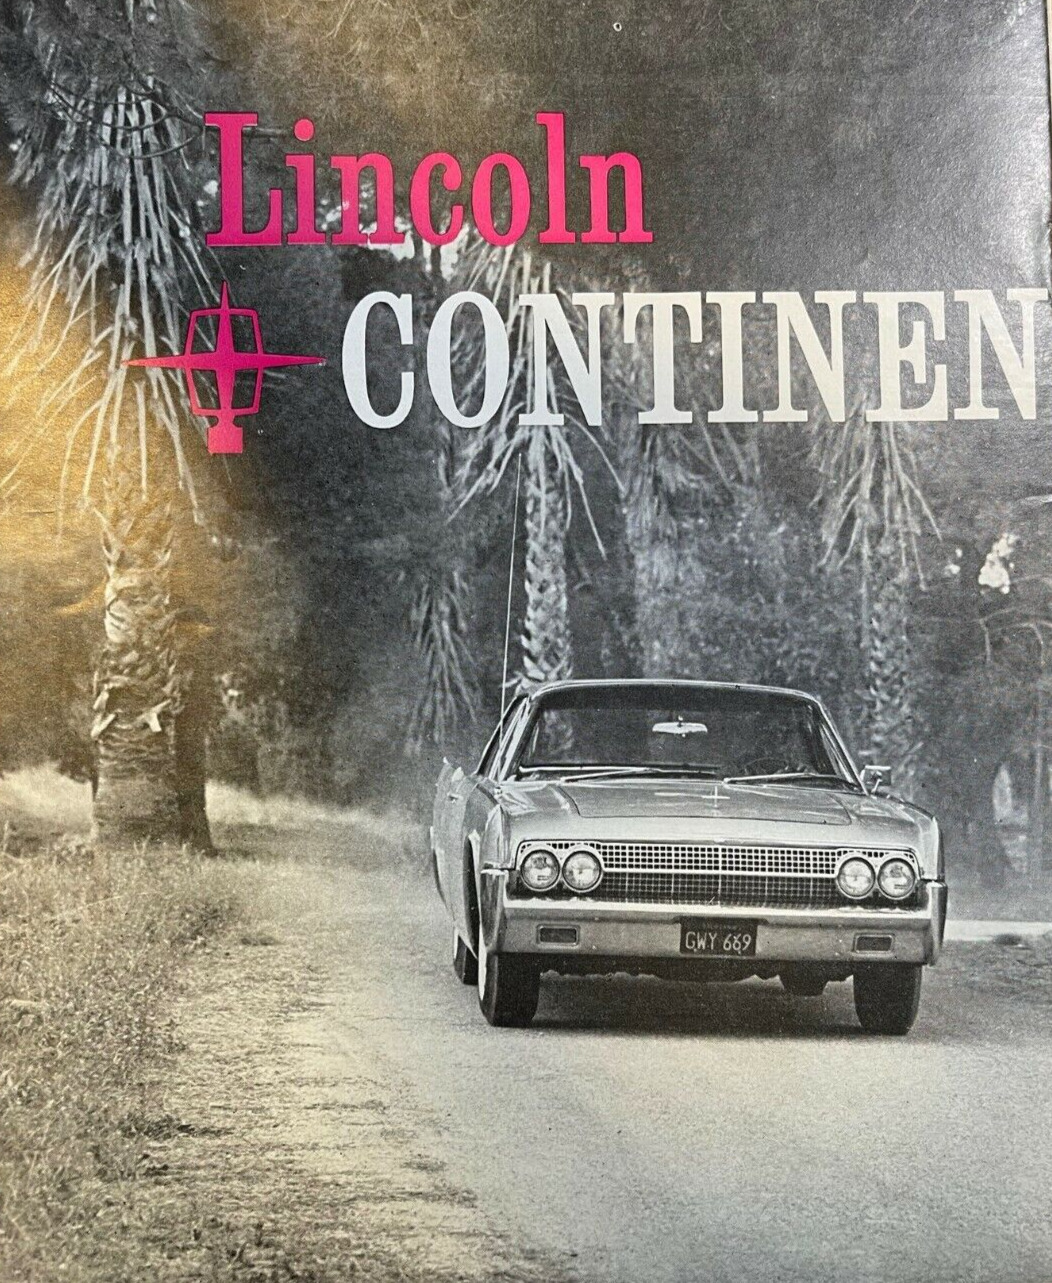 Road Test 1963 Lincoln Continental illustrated